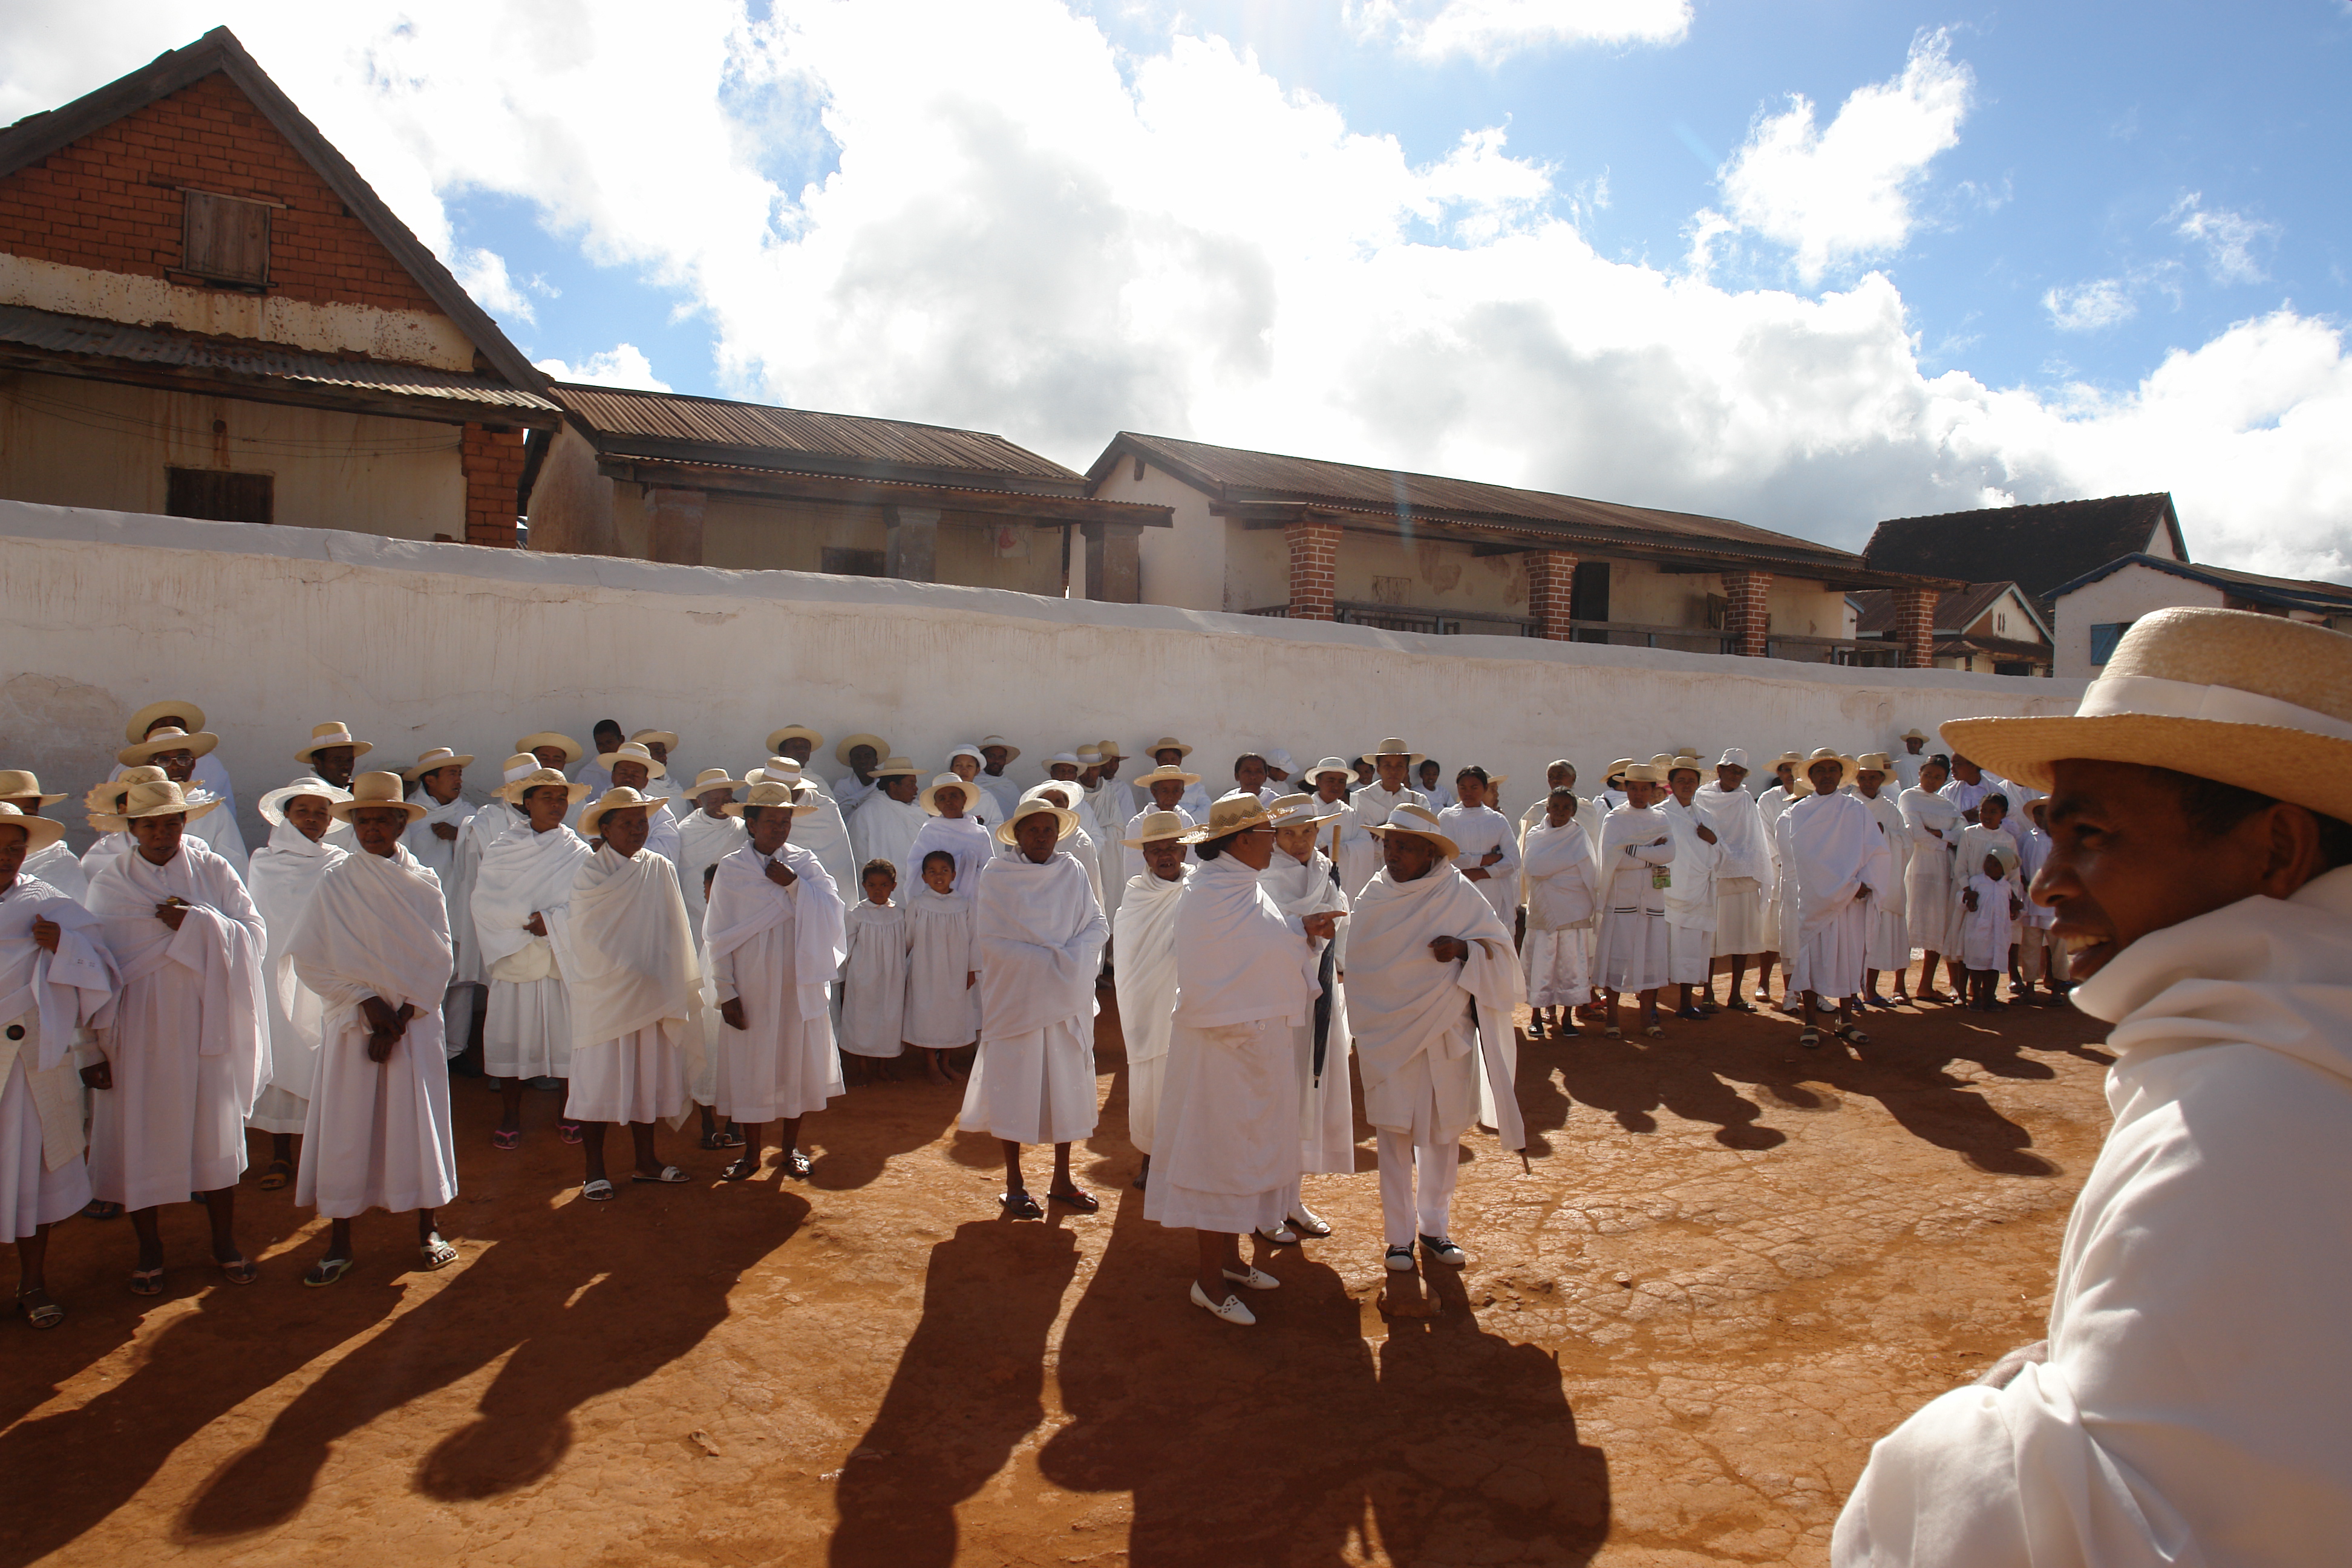 “Disciples of the white shepherds of Soatanana in their Sunday procession”, Madagascar